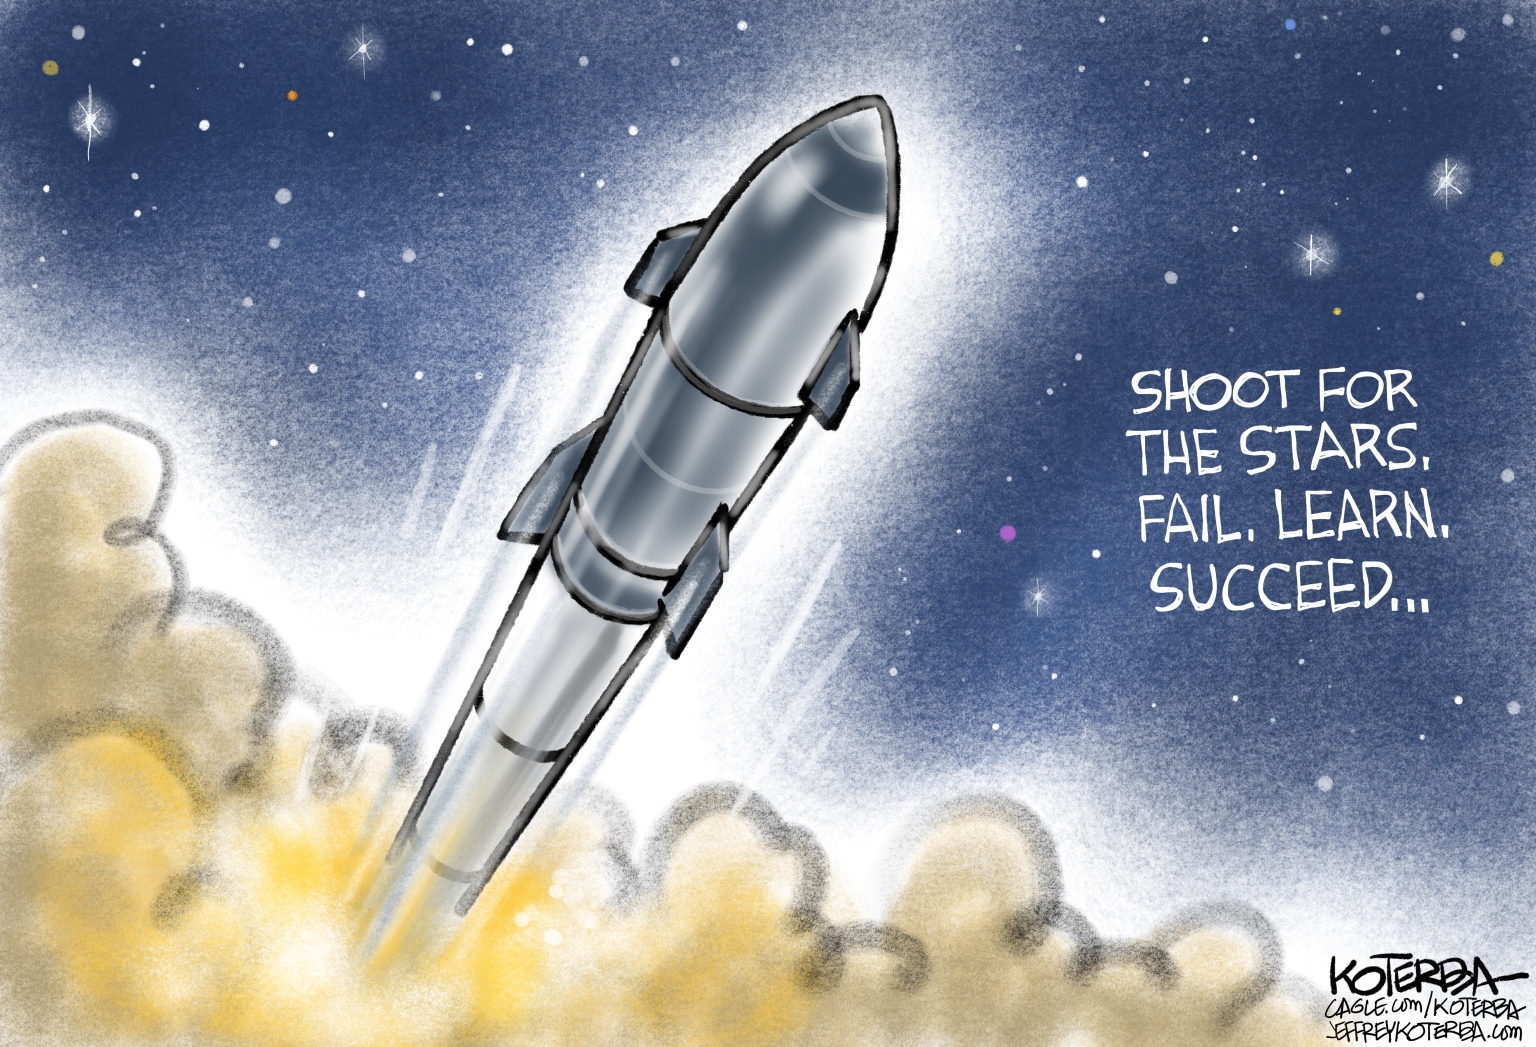 Editorial Cartoon: SpaceX Starship - The Independent | News Events ...